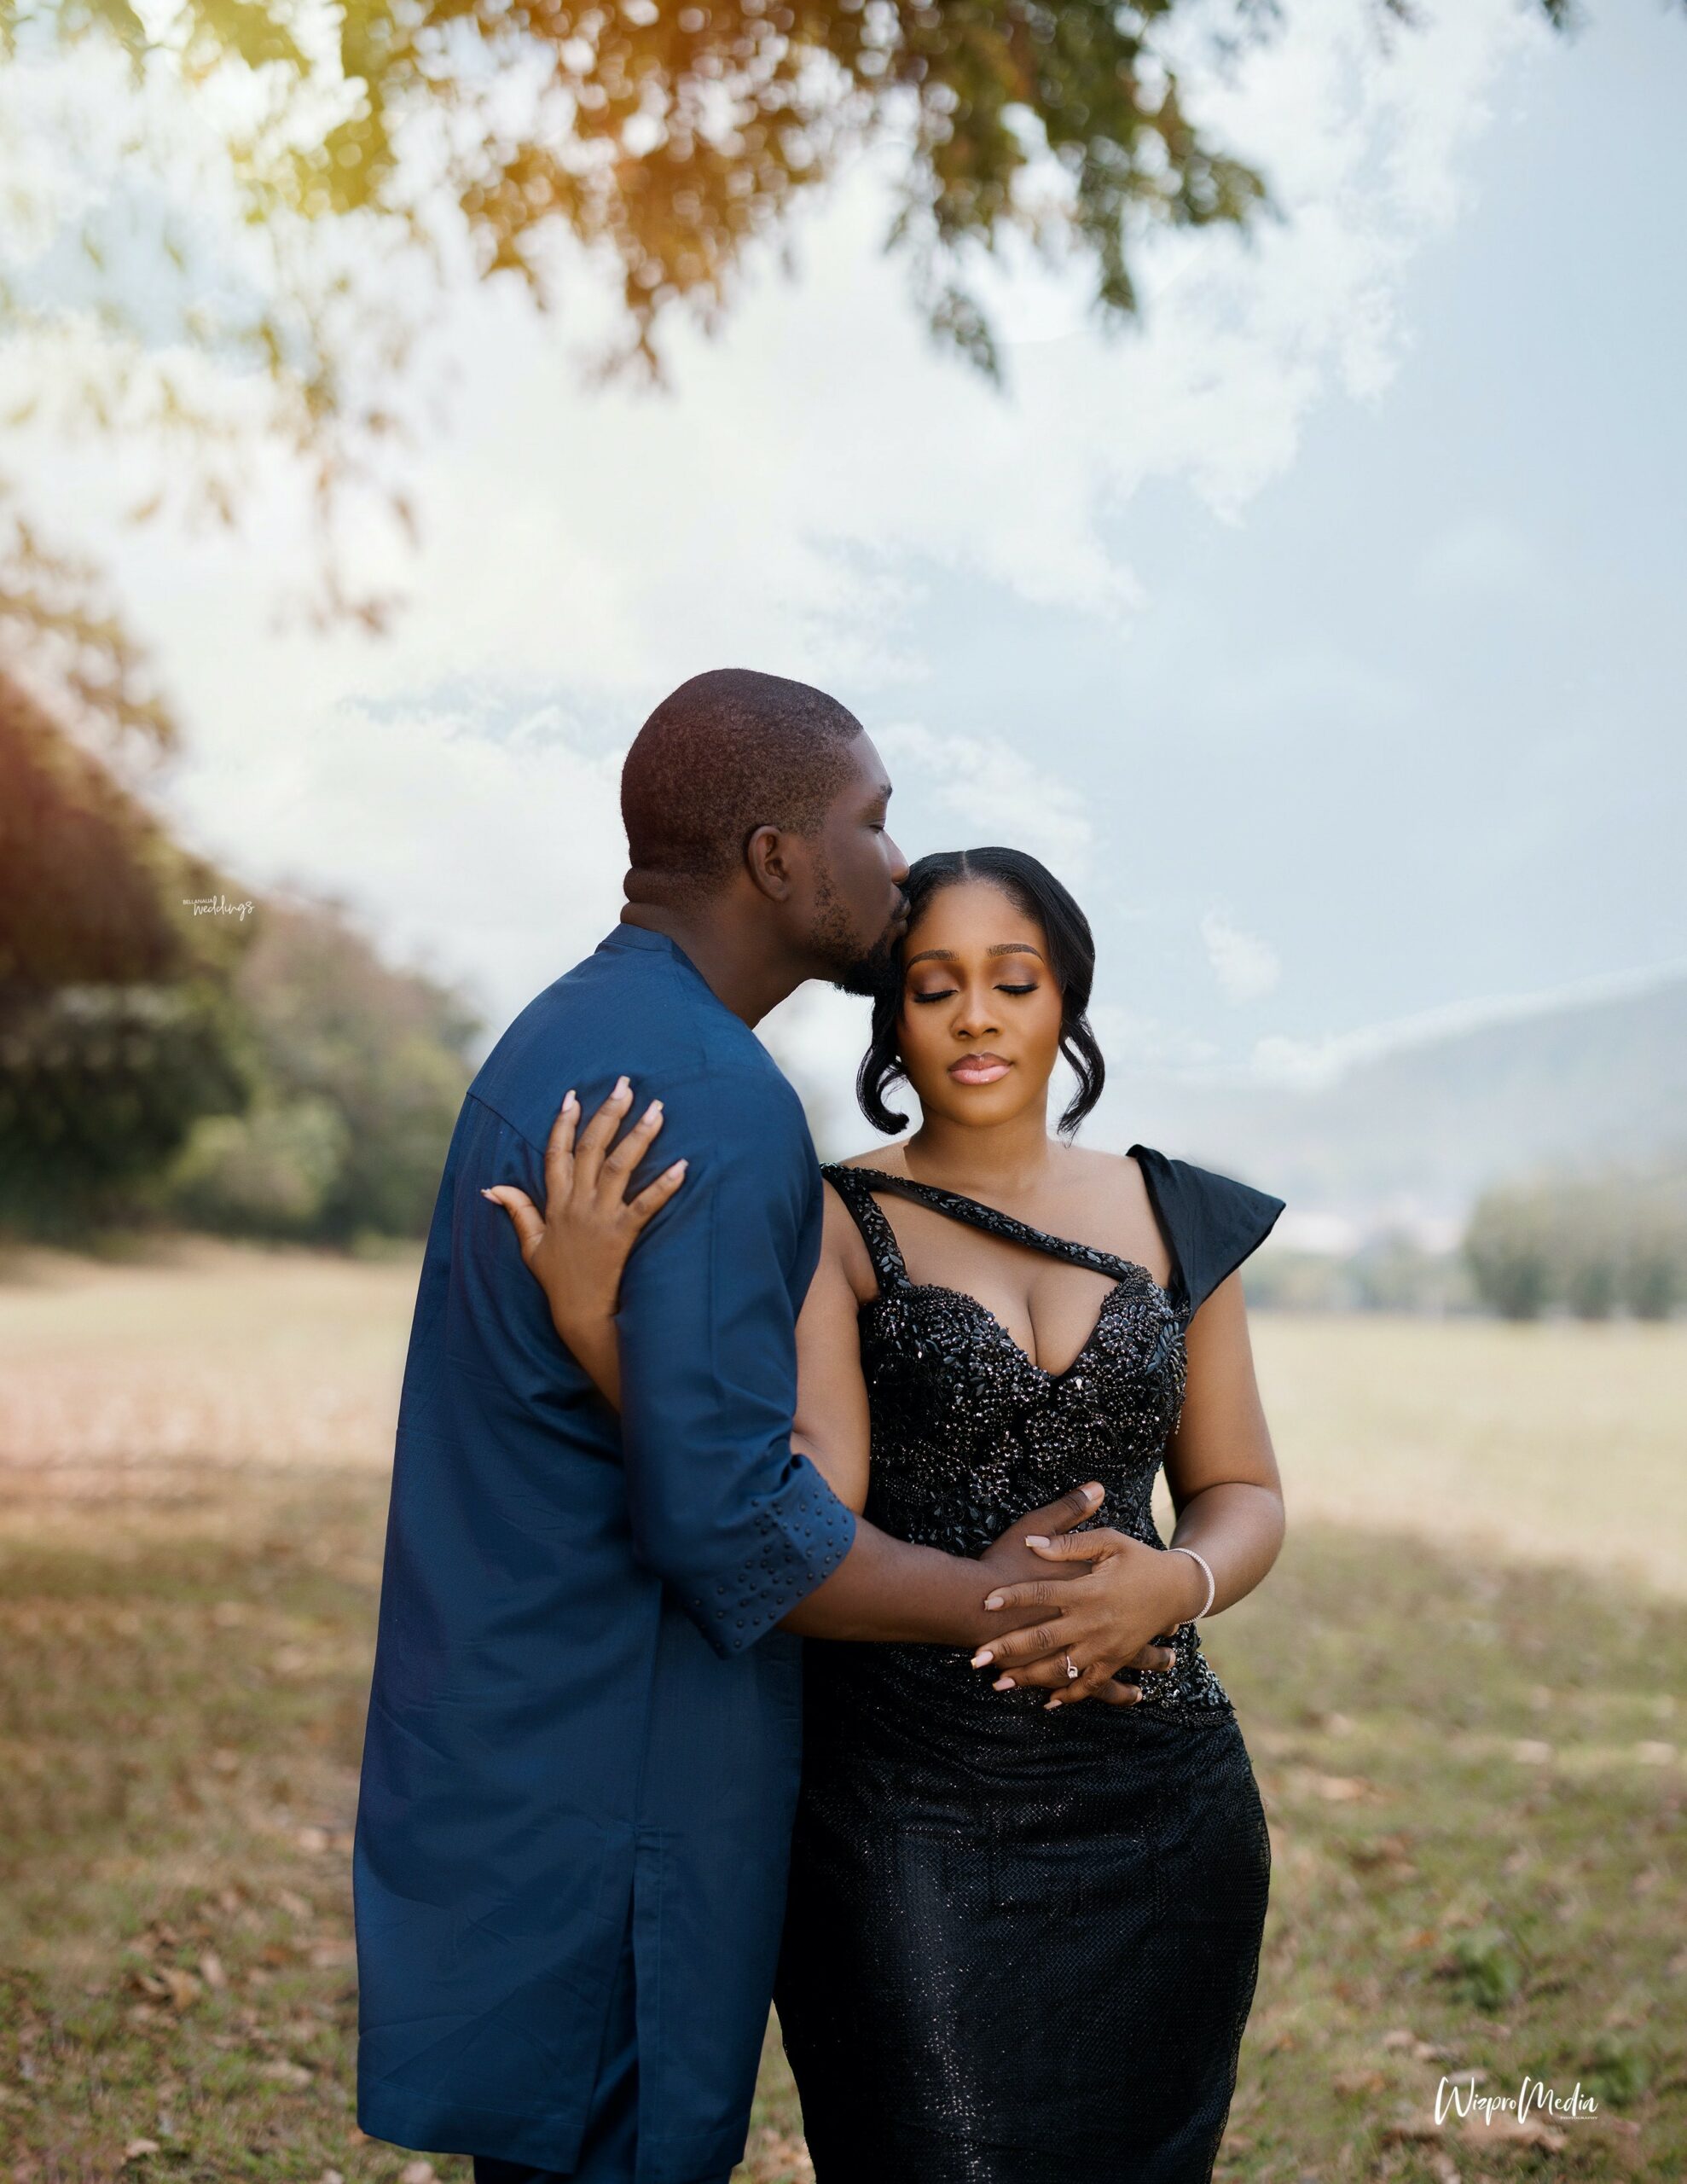 Nonye & Kobi’s Fairytale Started With a Type Gesture 9 Years In the past!